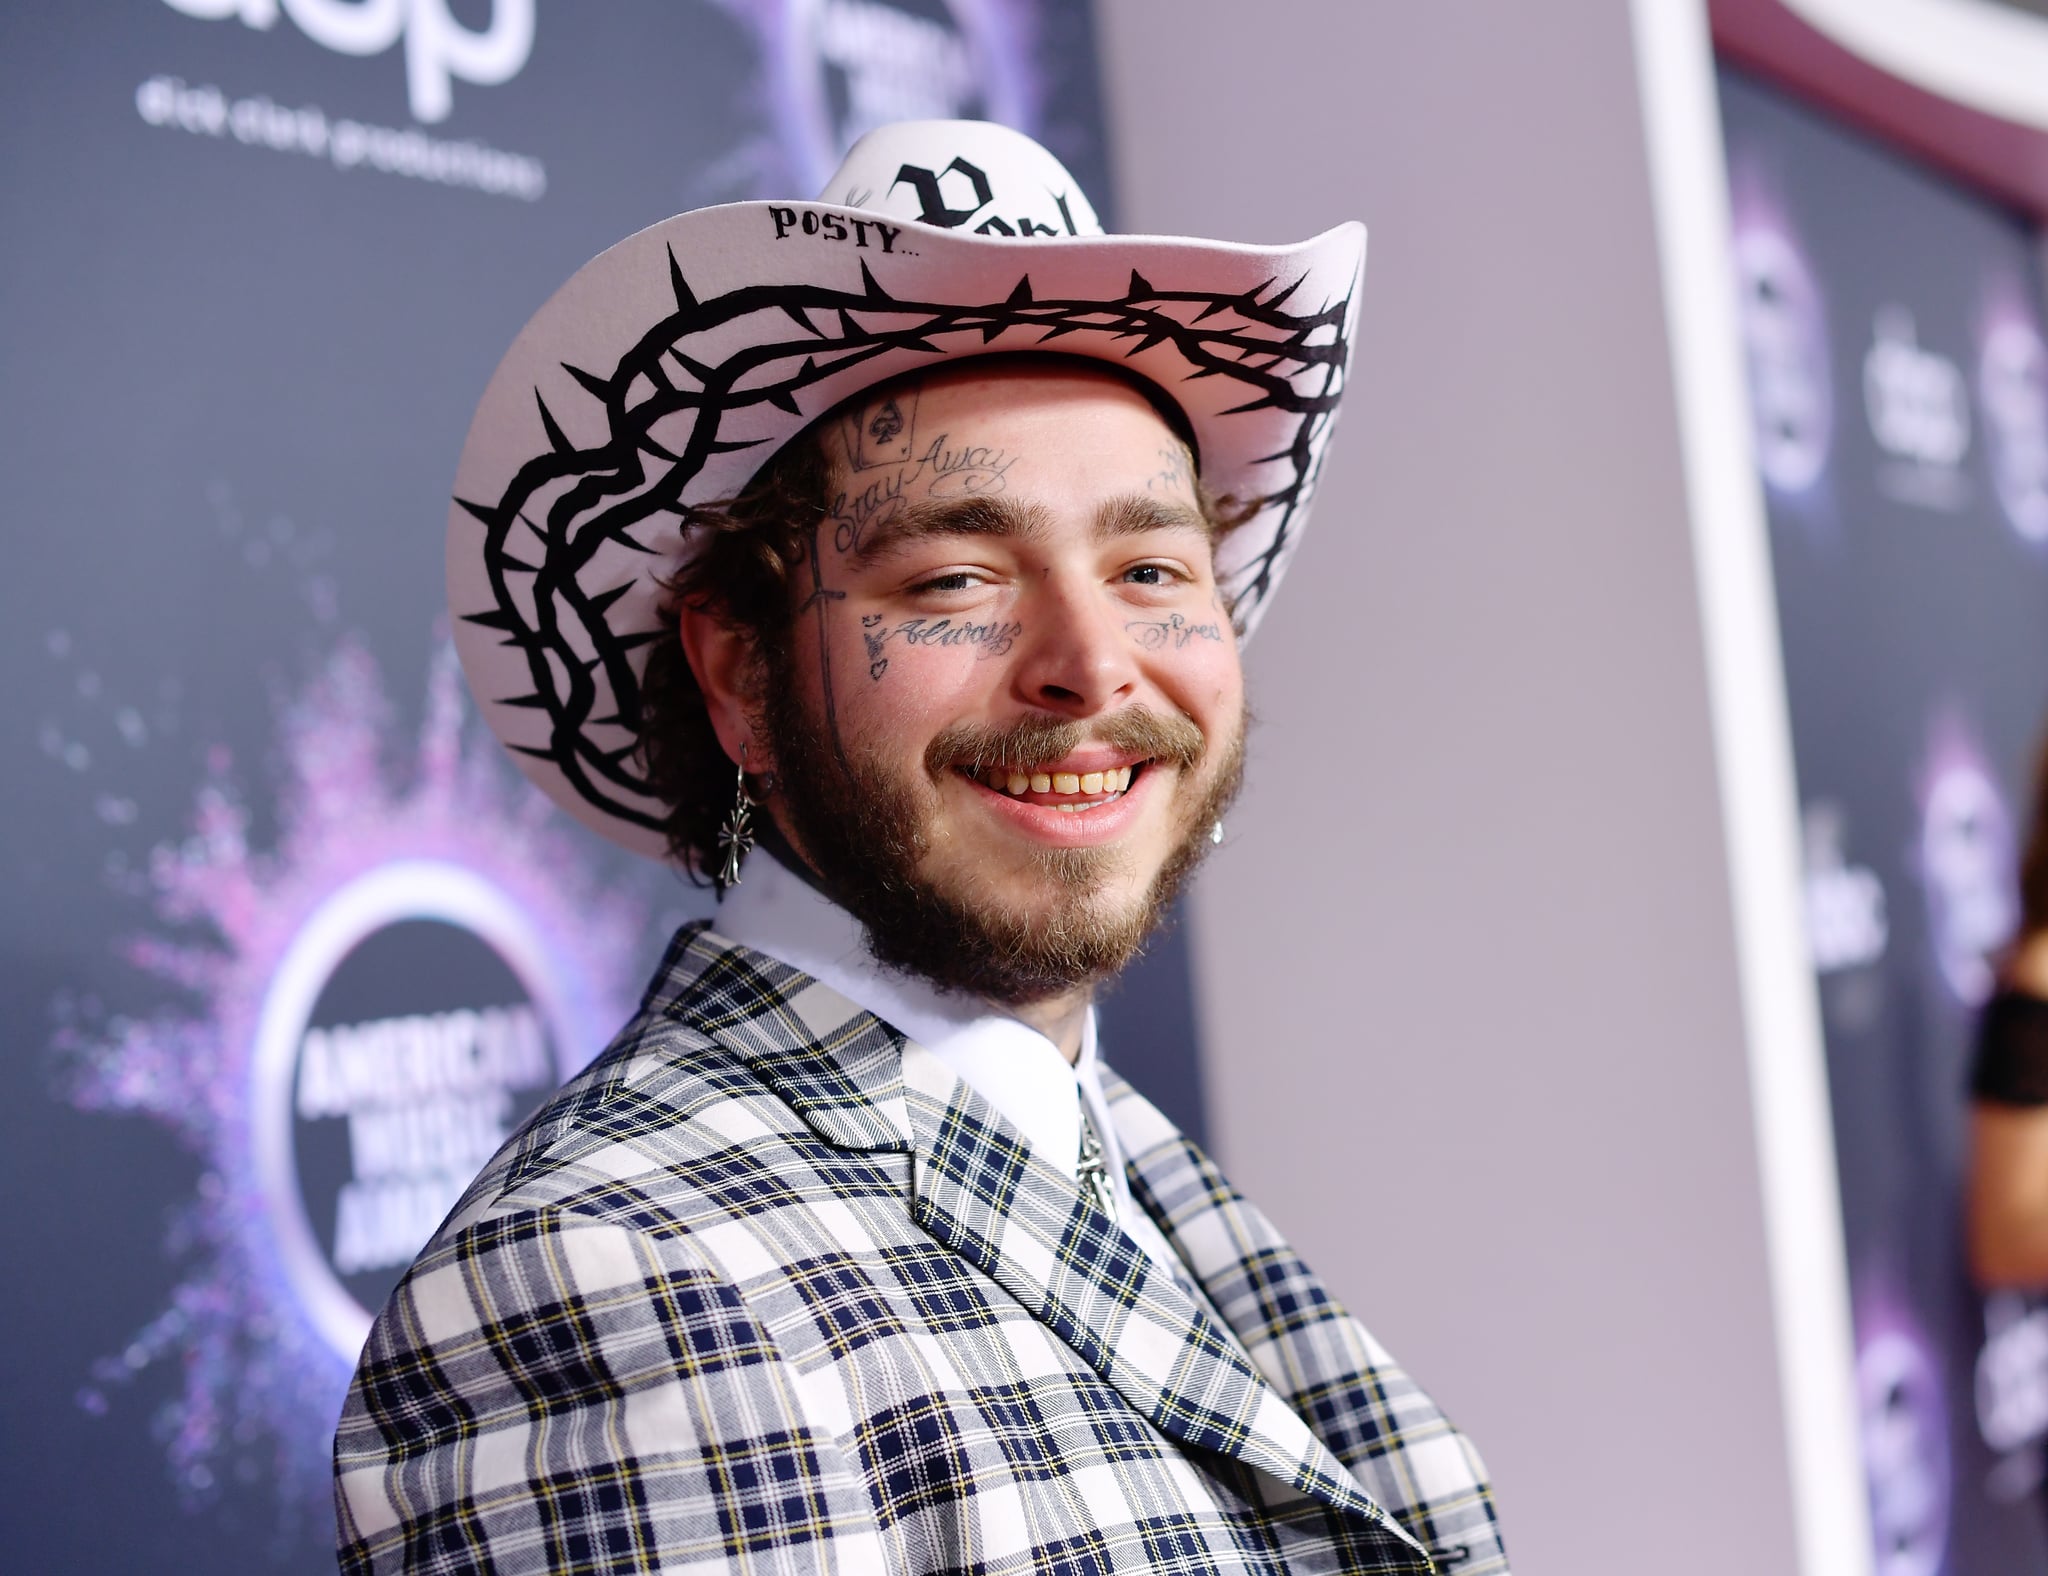 LOS ANGELES, CALIFORNIA - NOVEMBER 24: Post Malone attends the 2019 American Music Awards at Microsoft Theater on November 24, 2019 in Los Angeles, California. (Photo by Matt Winkelmeyer/Getty Images for dcp)